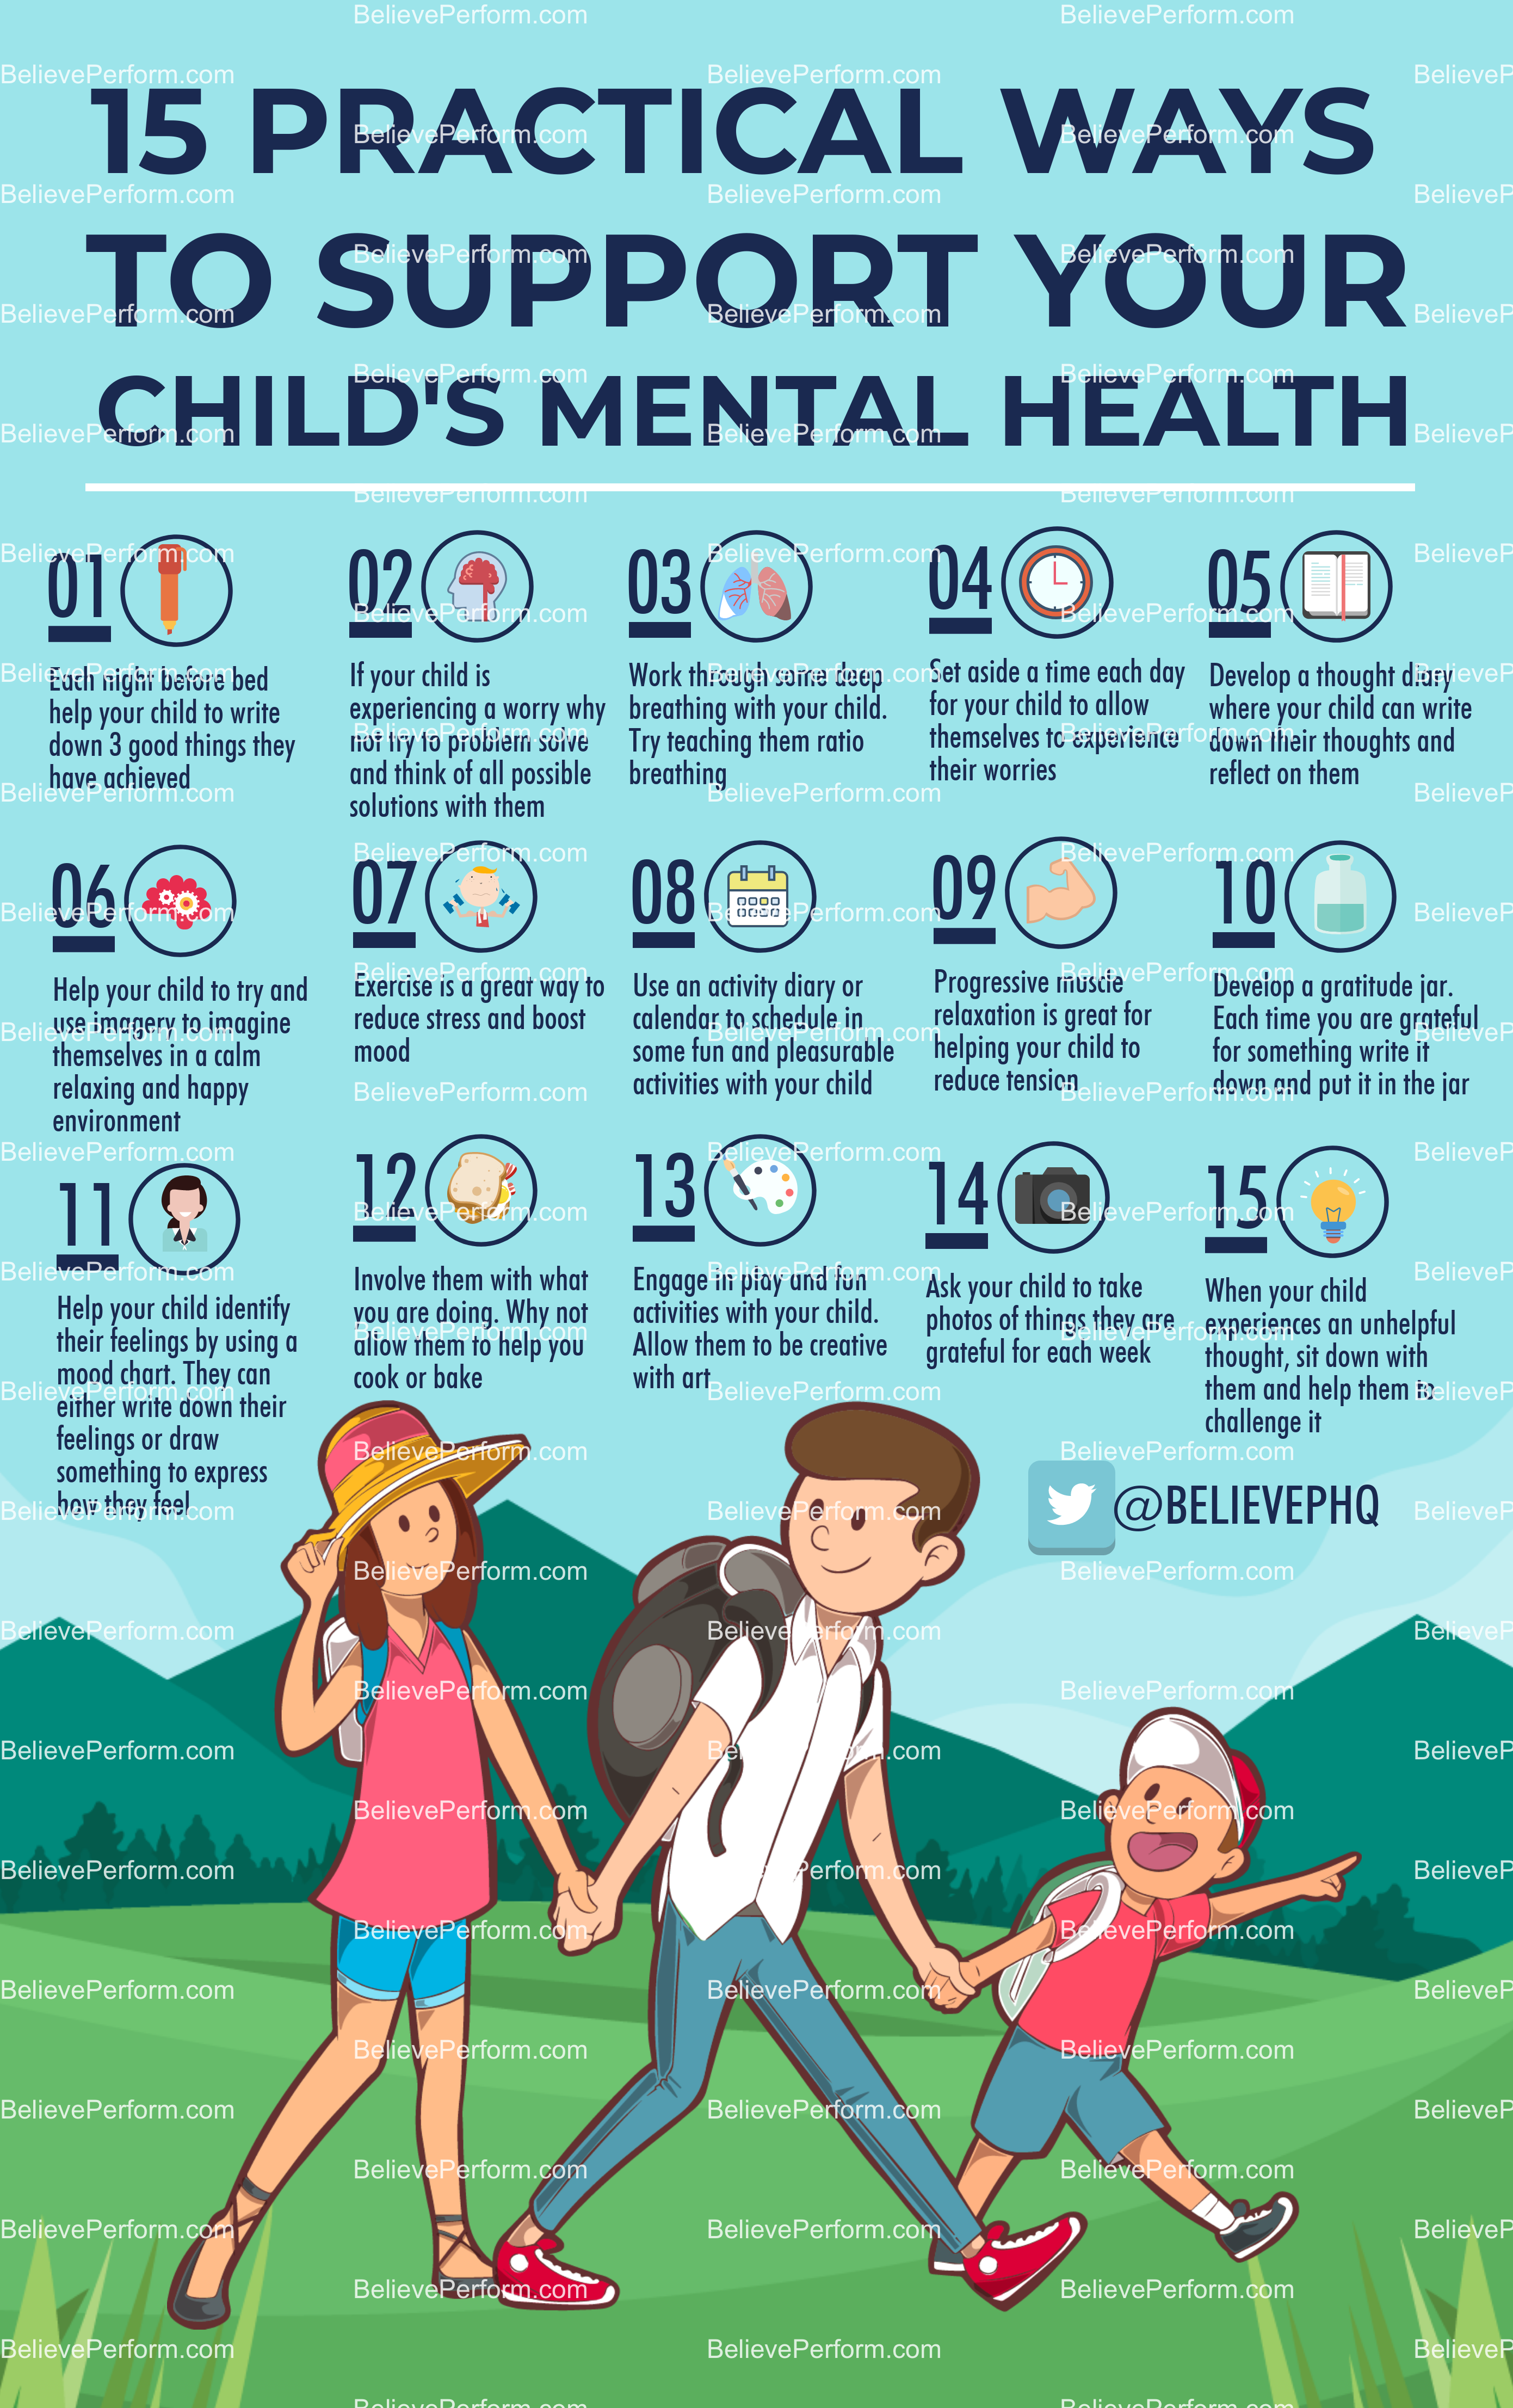 15 practical ways to support your child's mental health